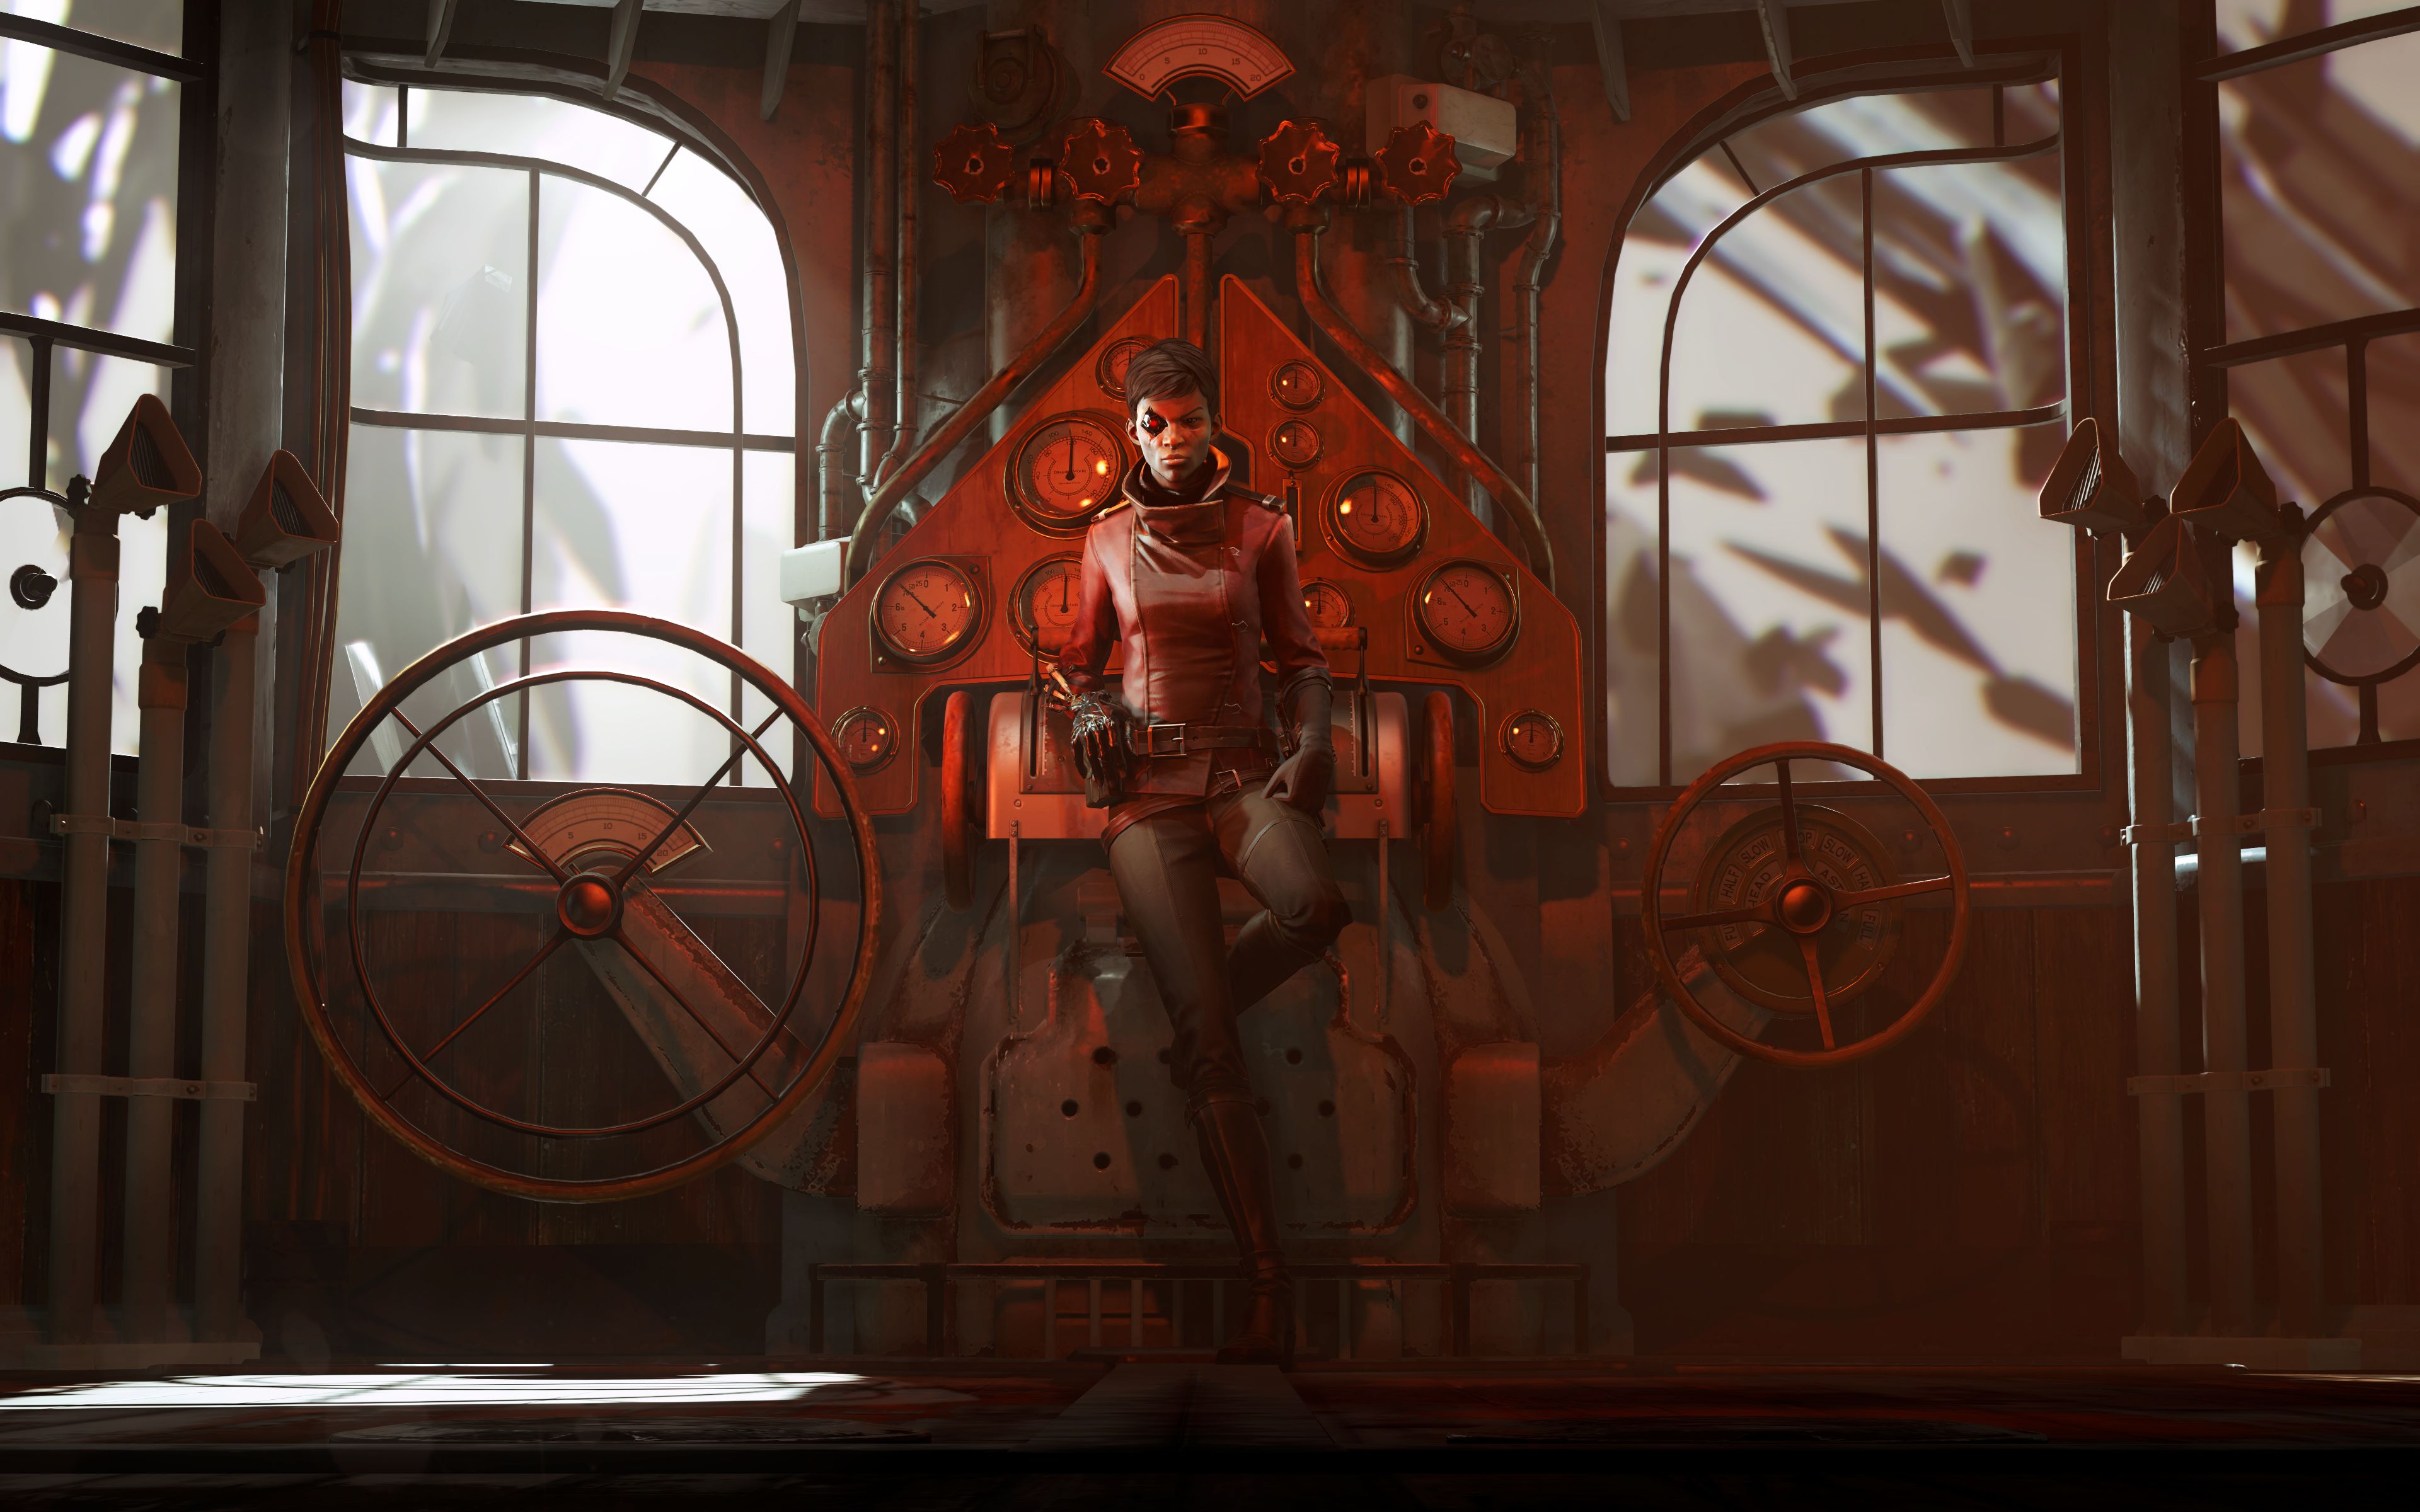 Character from Dishonored game seated in front of controls